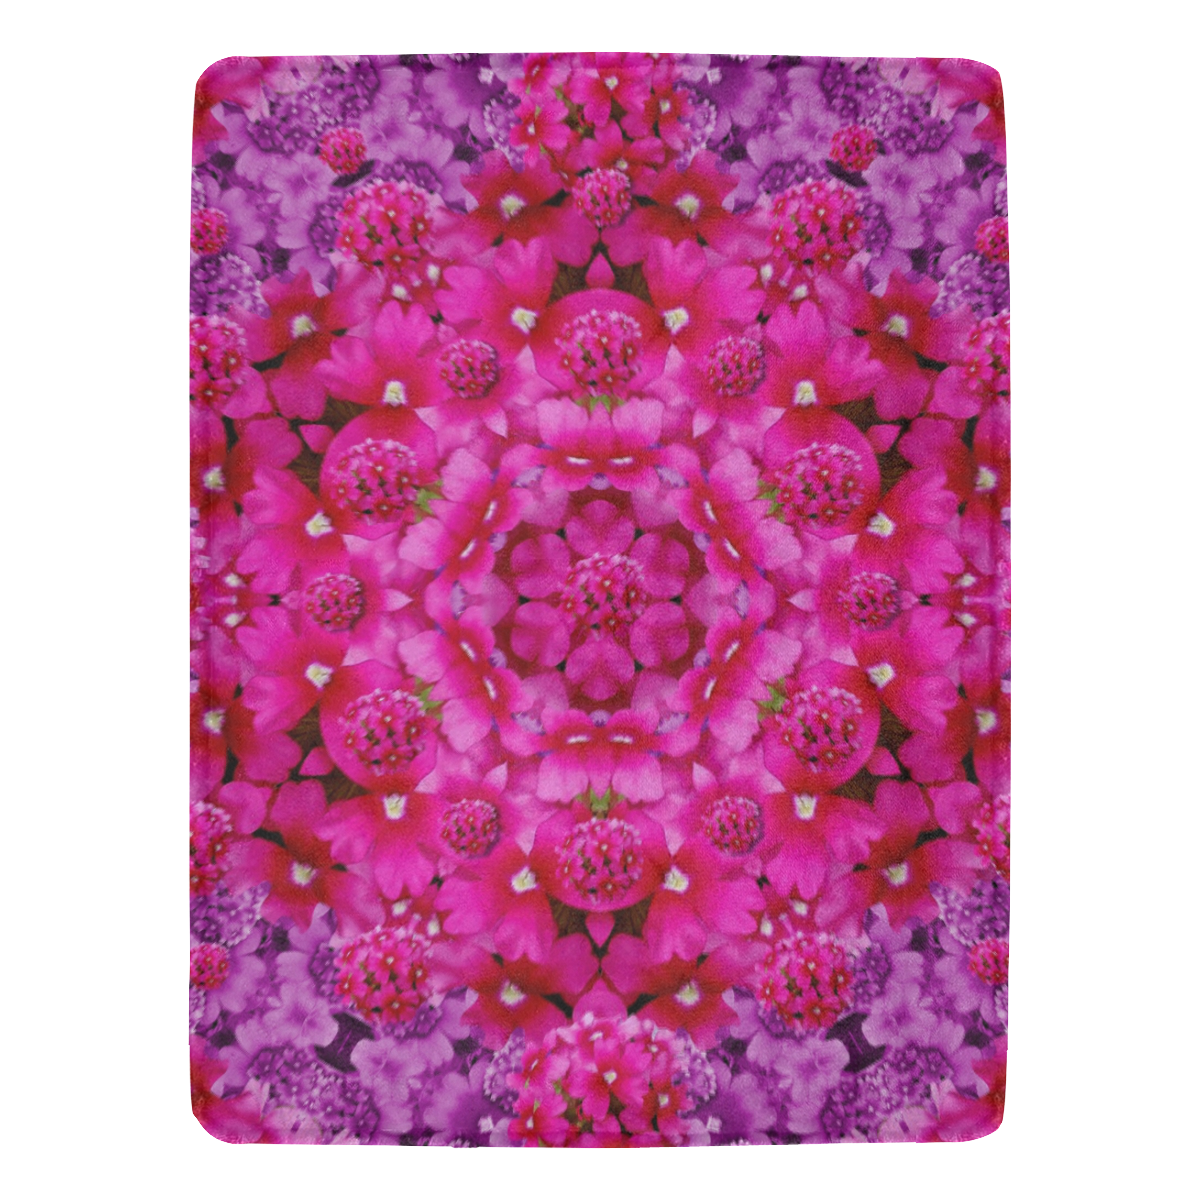 flower suprise to love and enjoy Ultra-Soft Micro Fleece Blanket 60"x80"